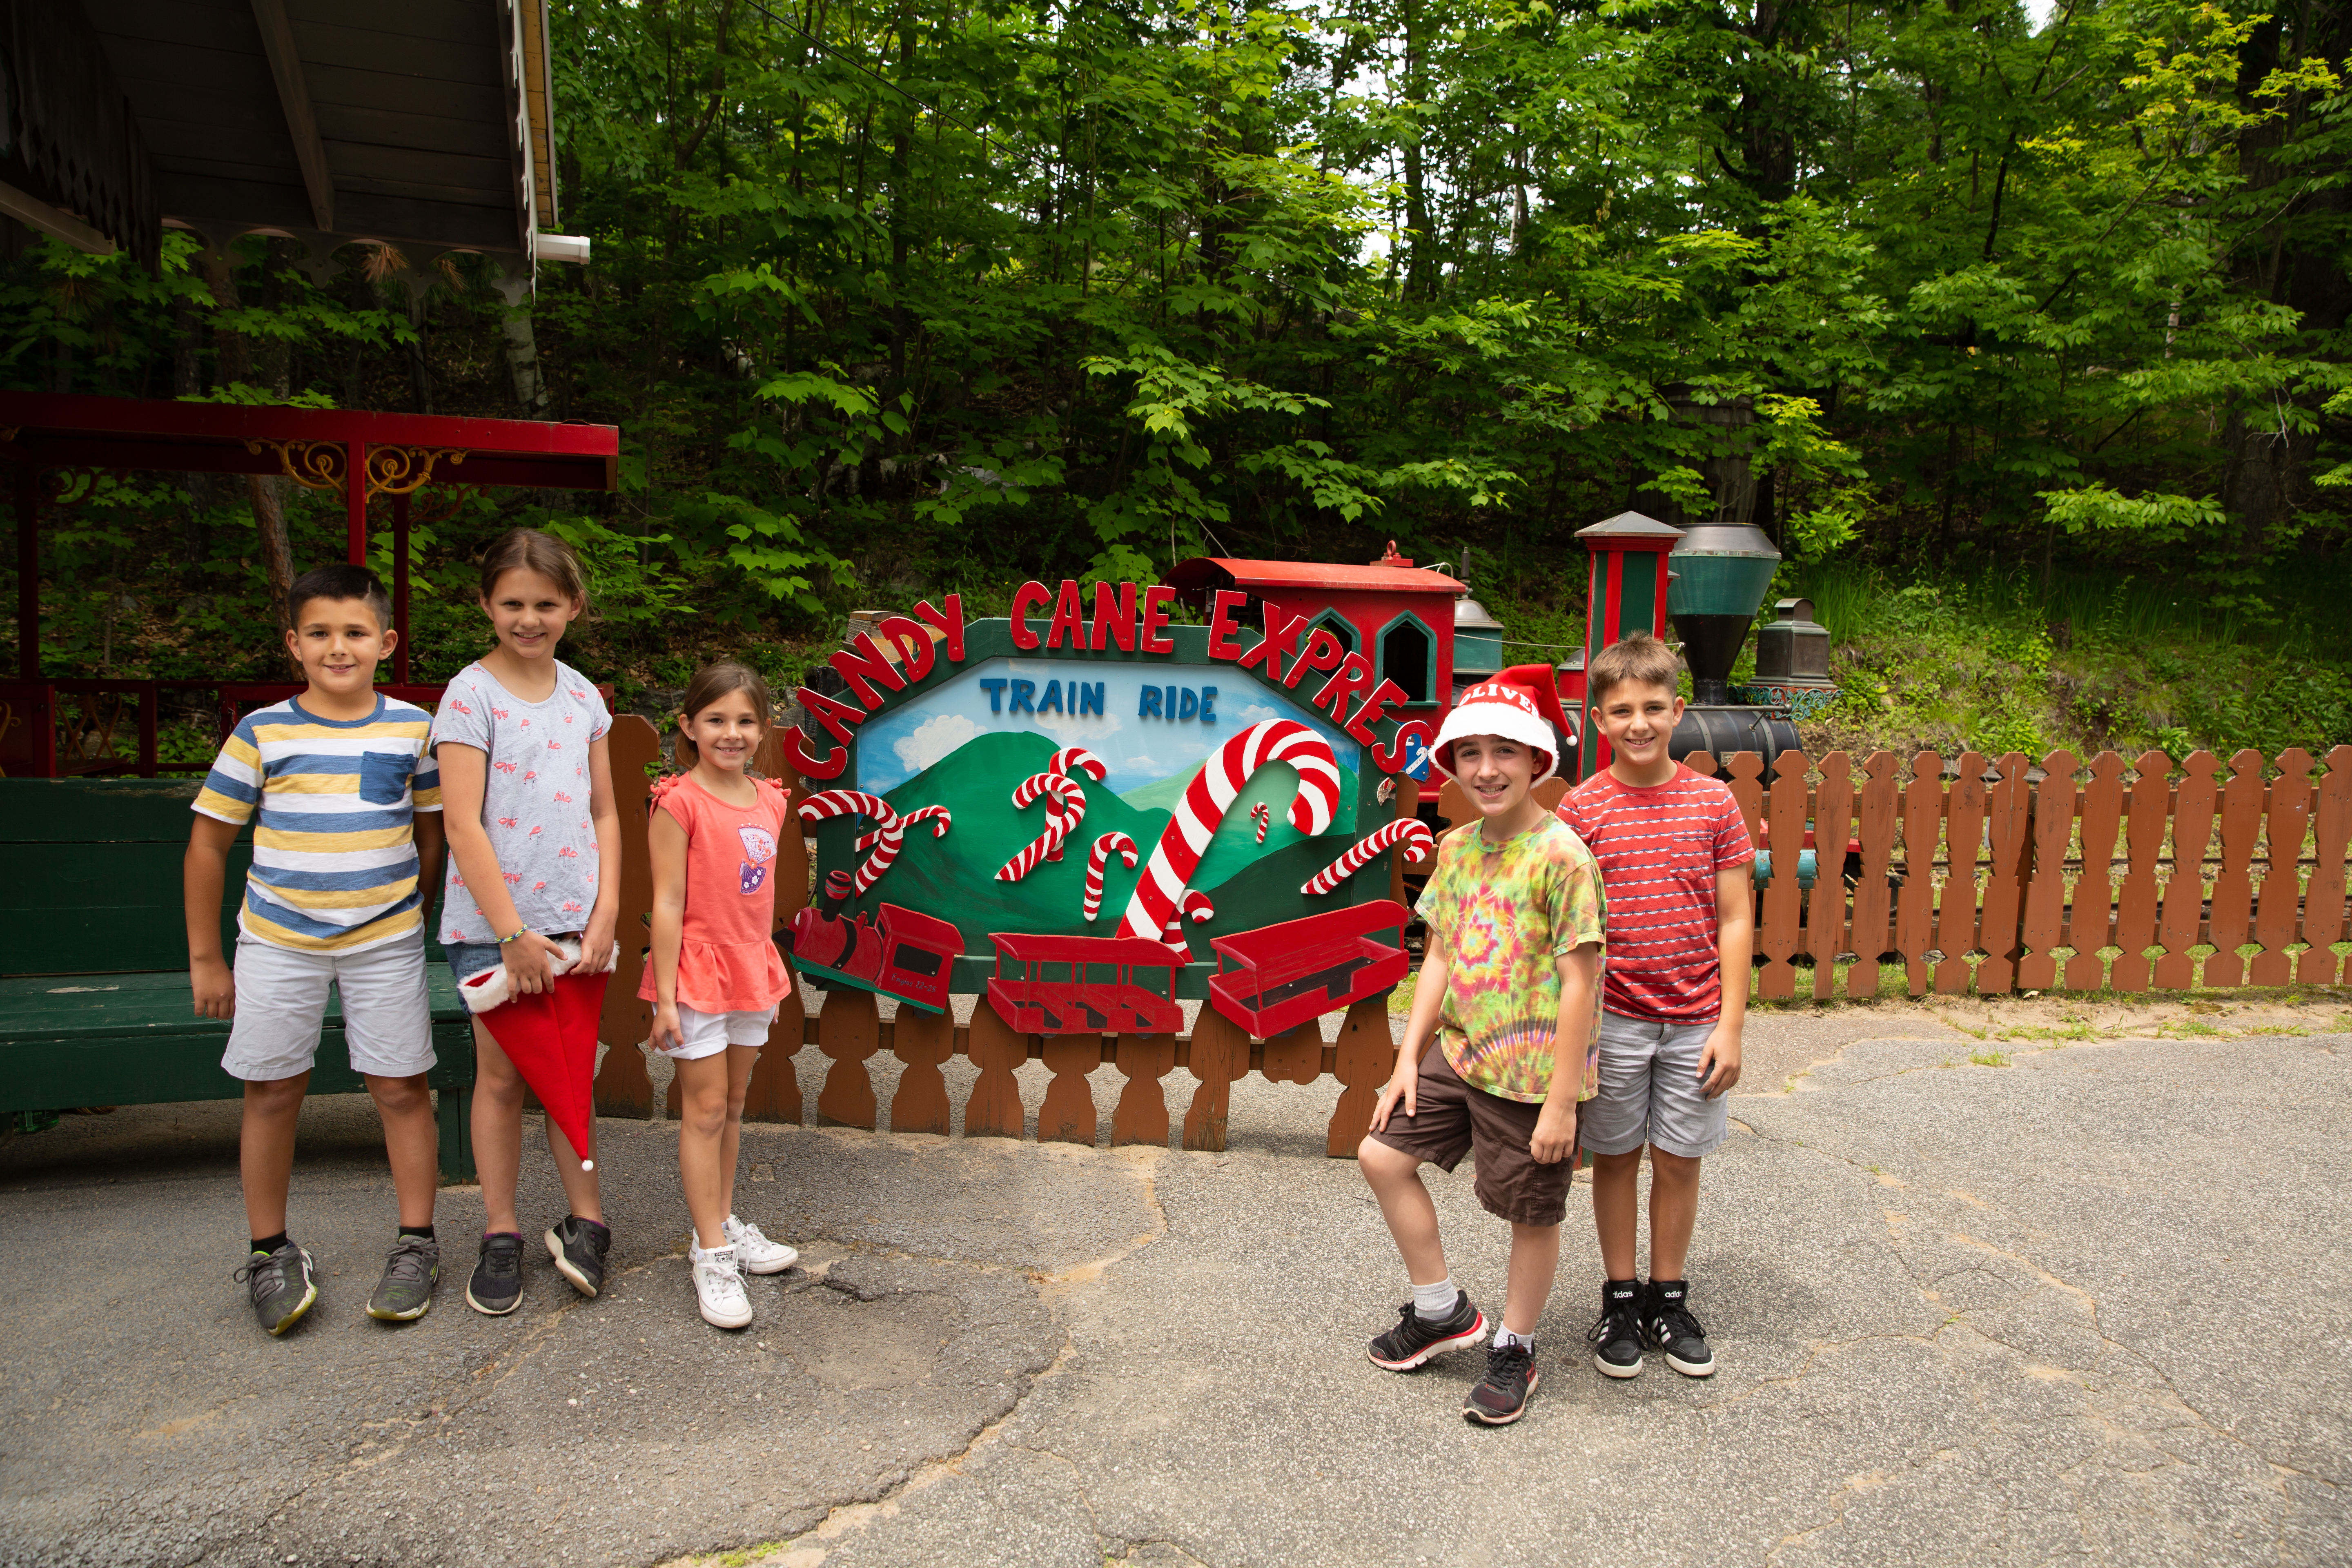 Five children standing in front of a Candy Cane Express Train Ride sign at Santa's Workshop.